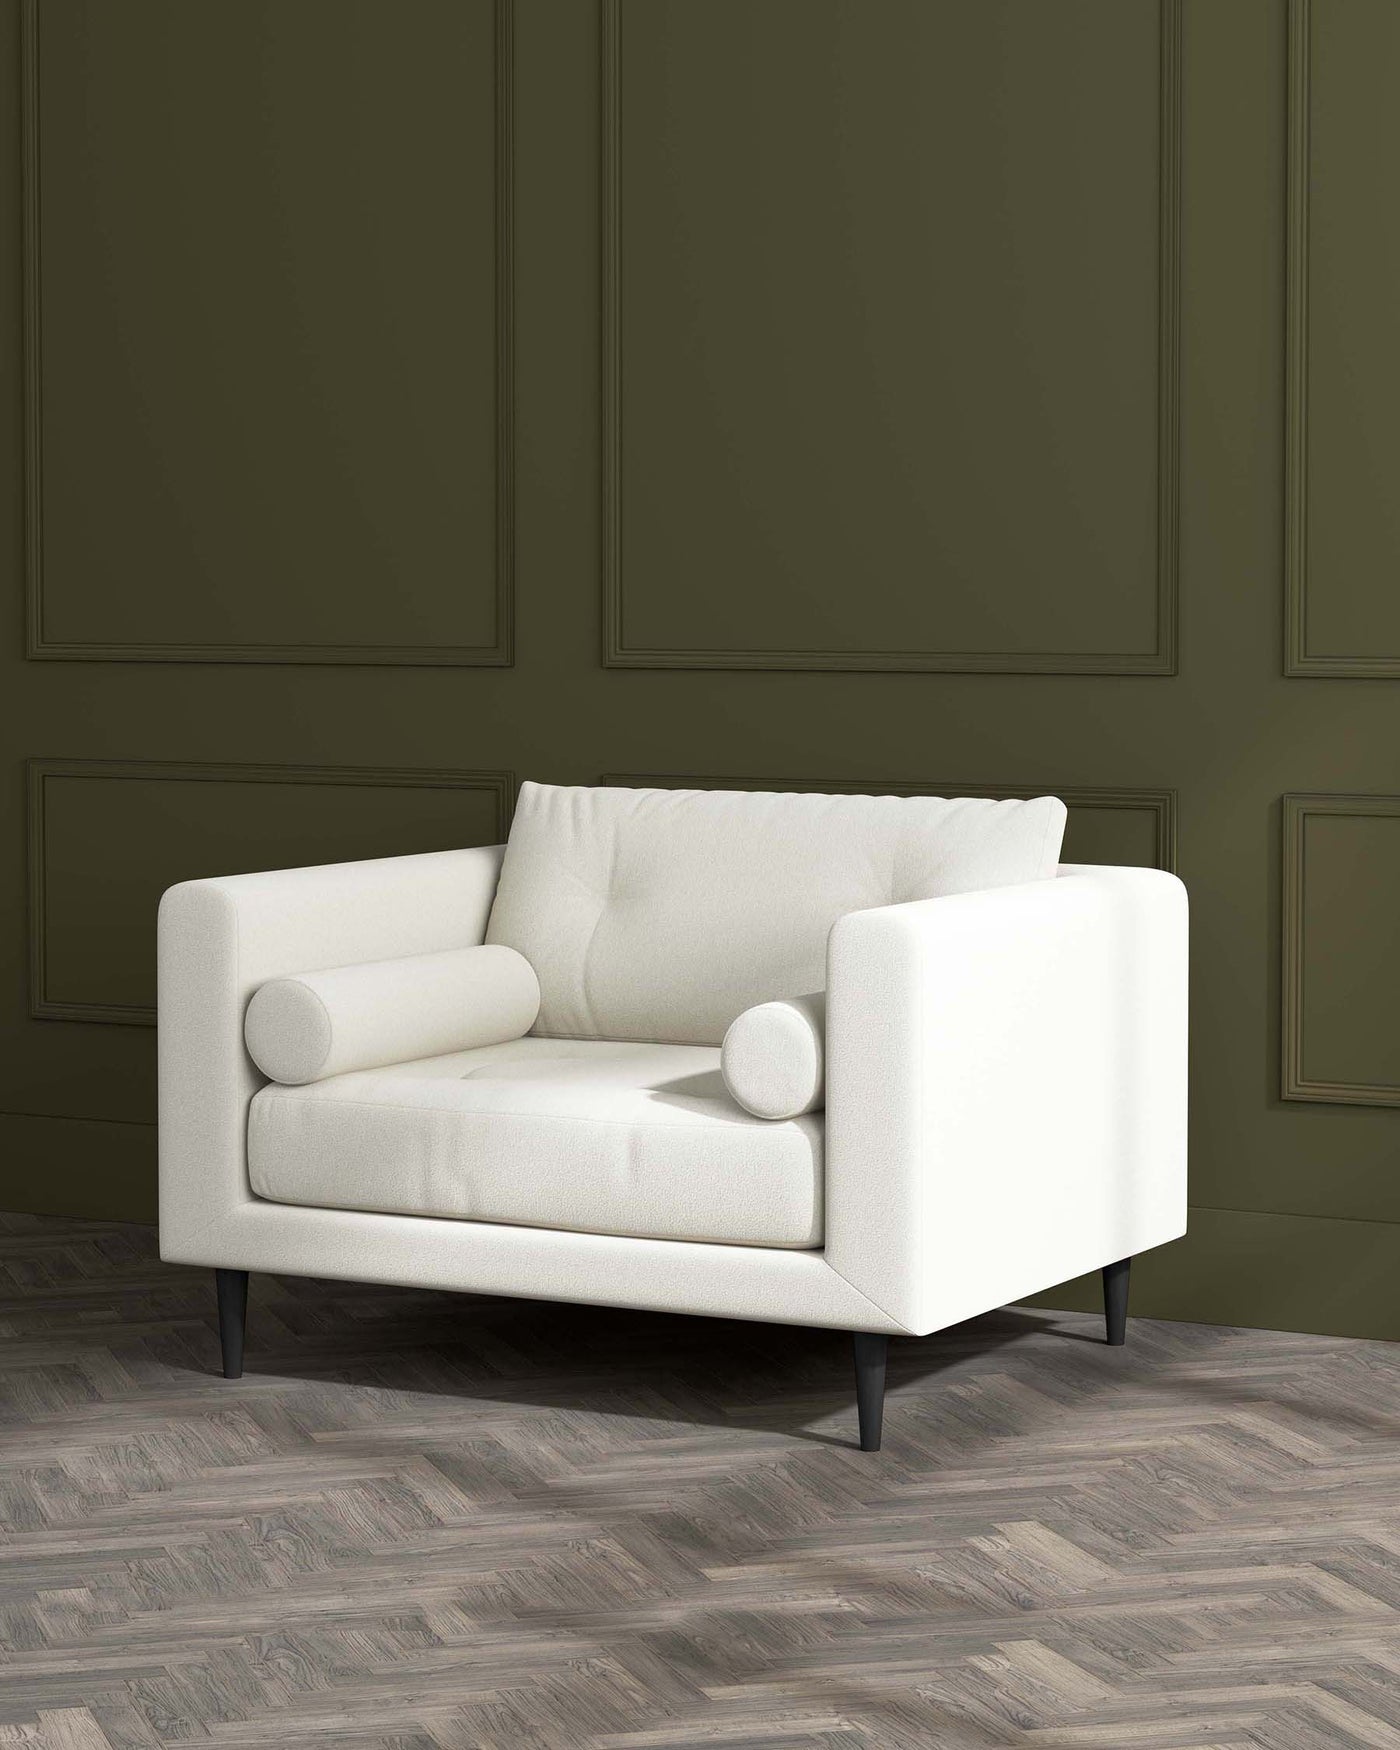 A modern white armchair with clean lines, featuring plush cushions and cylindrical armrests on minimalist black wooden legs, set against a green panelled wall and herringbone parquet flooring.